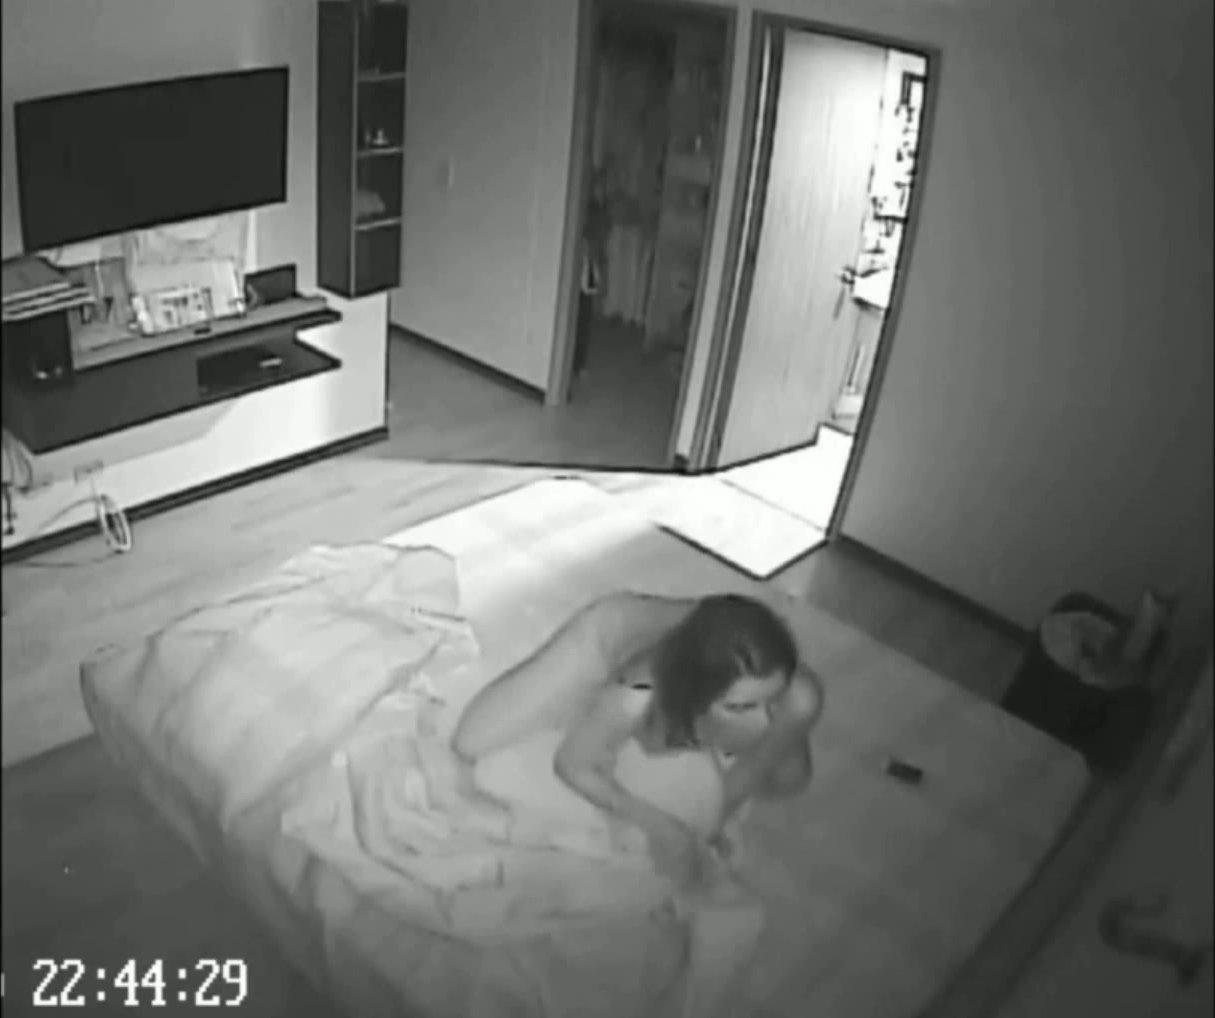 Straight Voyeur 2 hacked Ip cam pillow humping picture